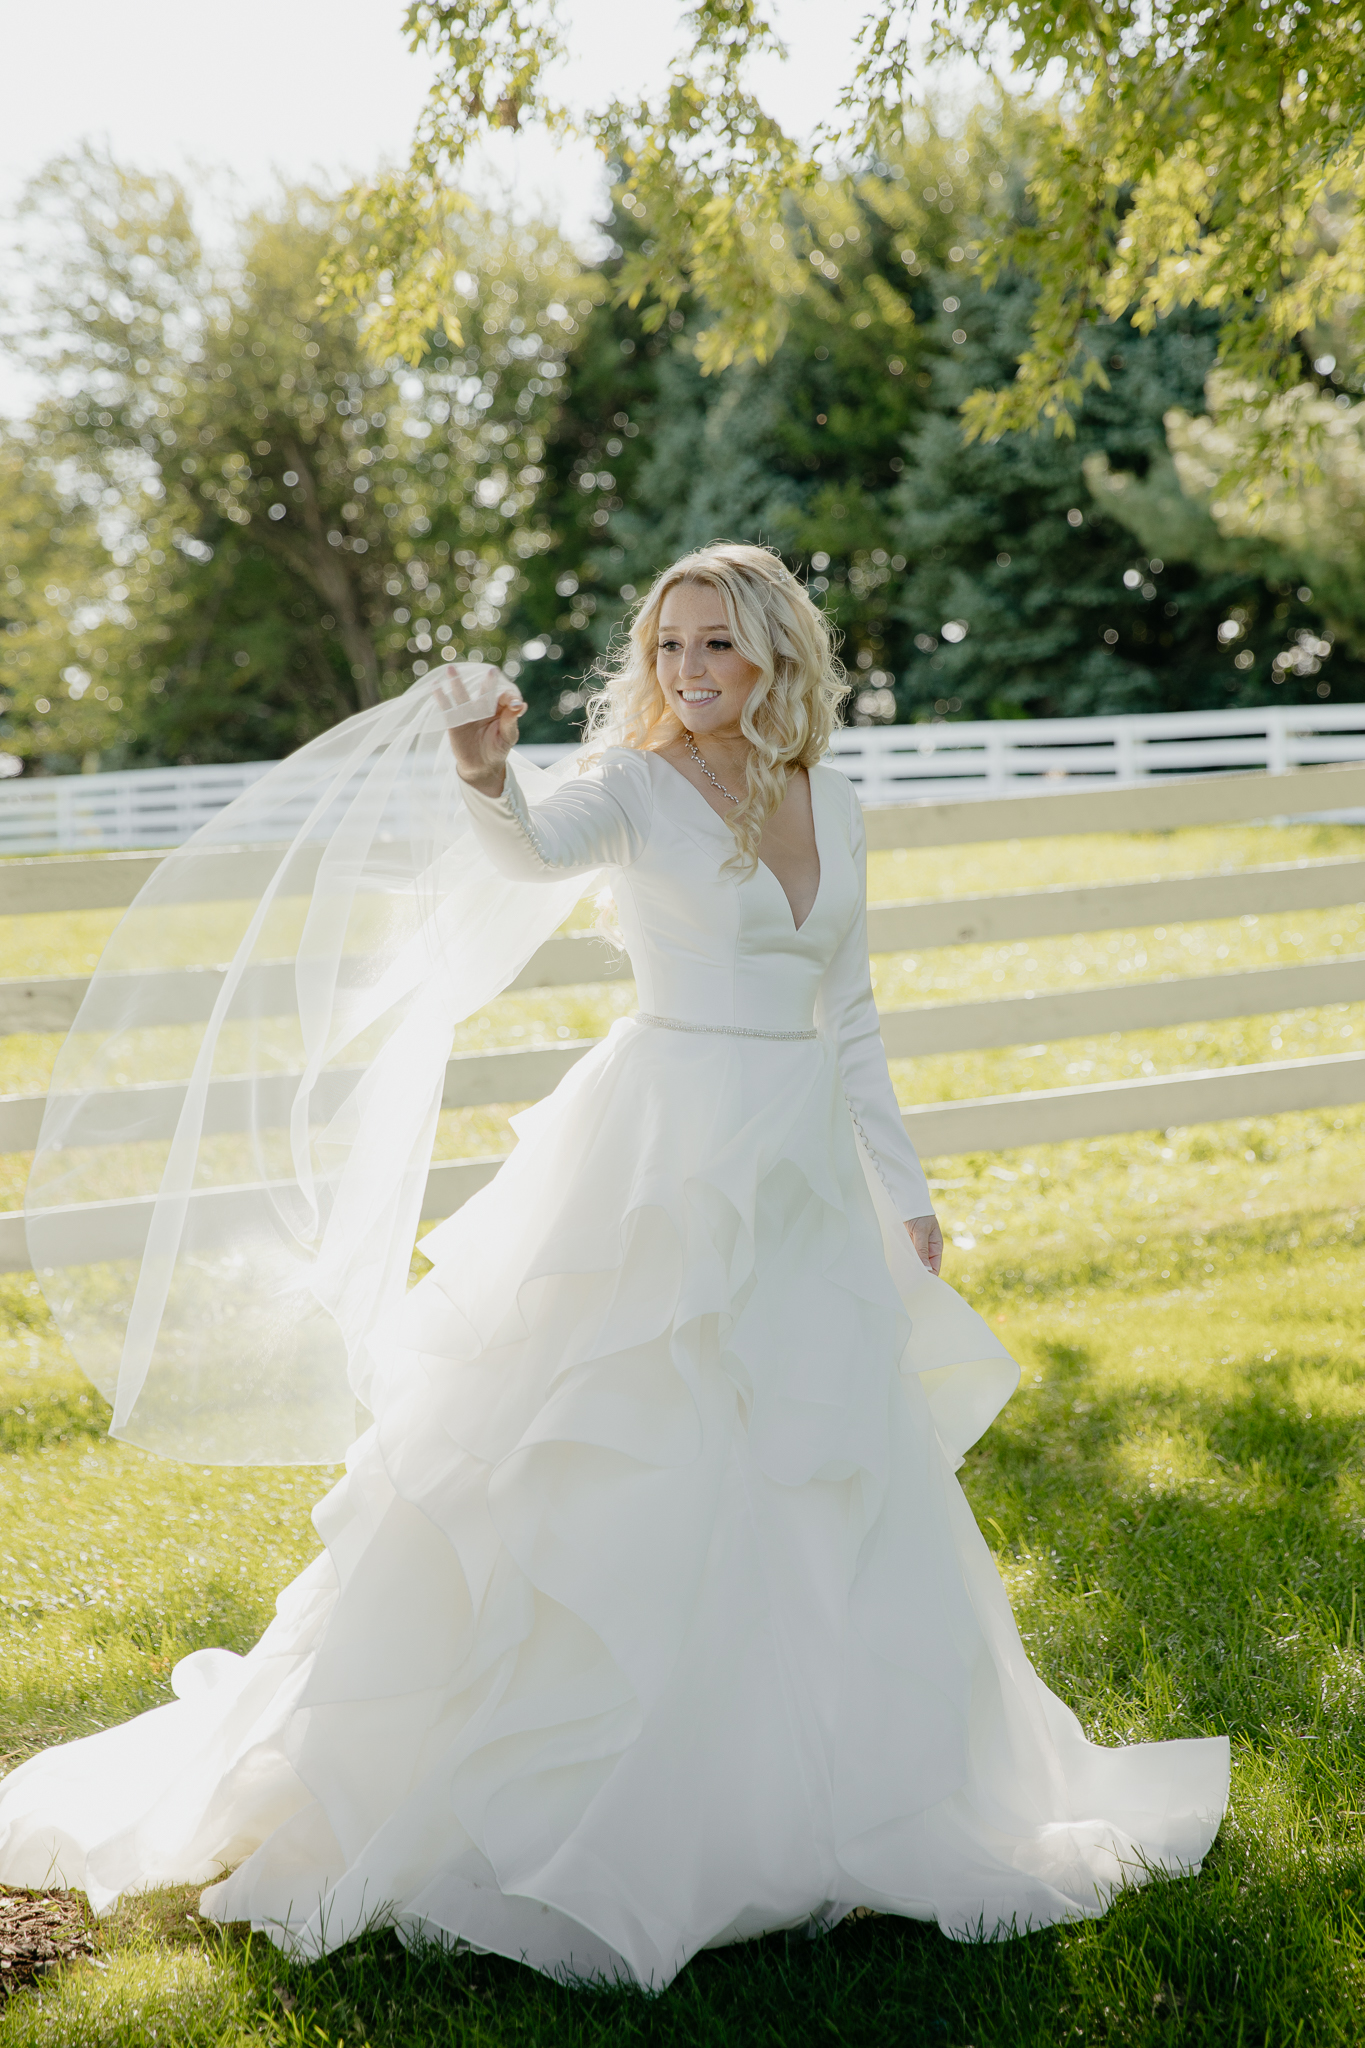 Portraits of bride in her wedding dress, with bouquet of flowers, near a horse pasture